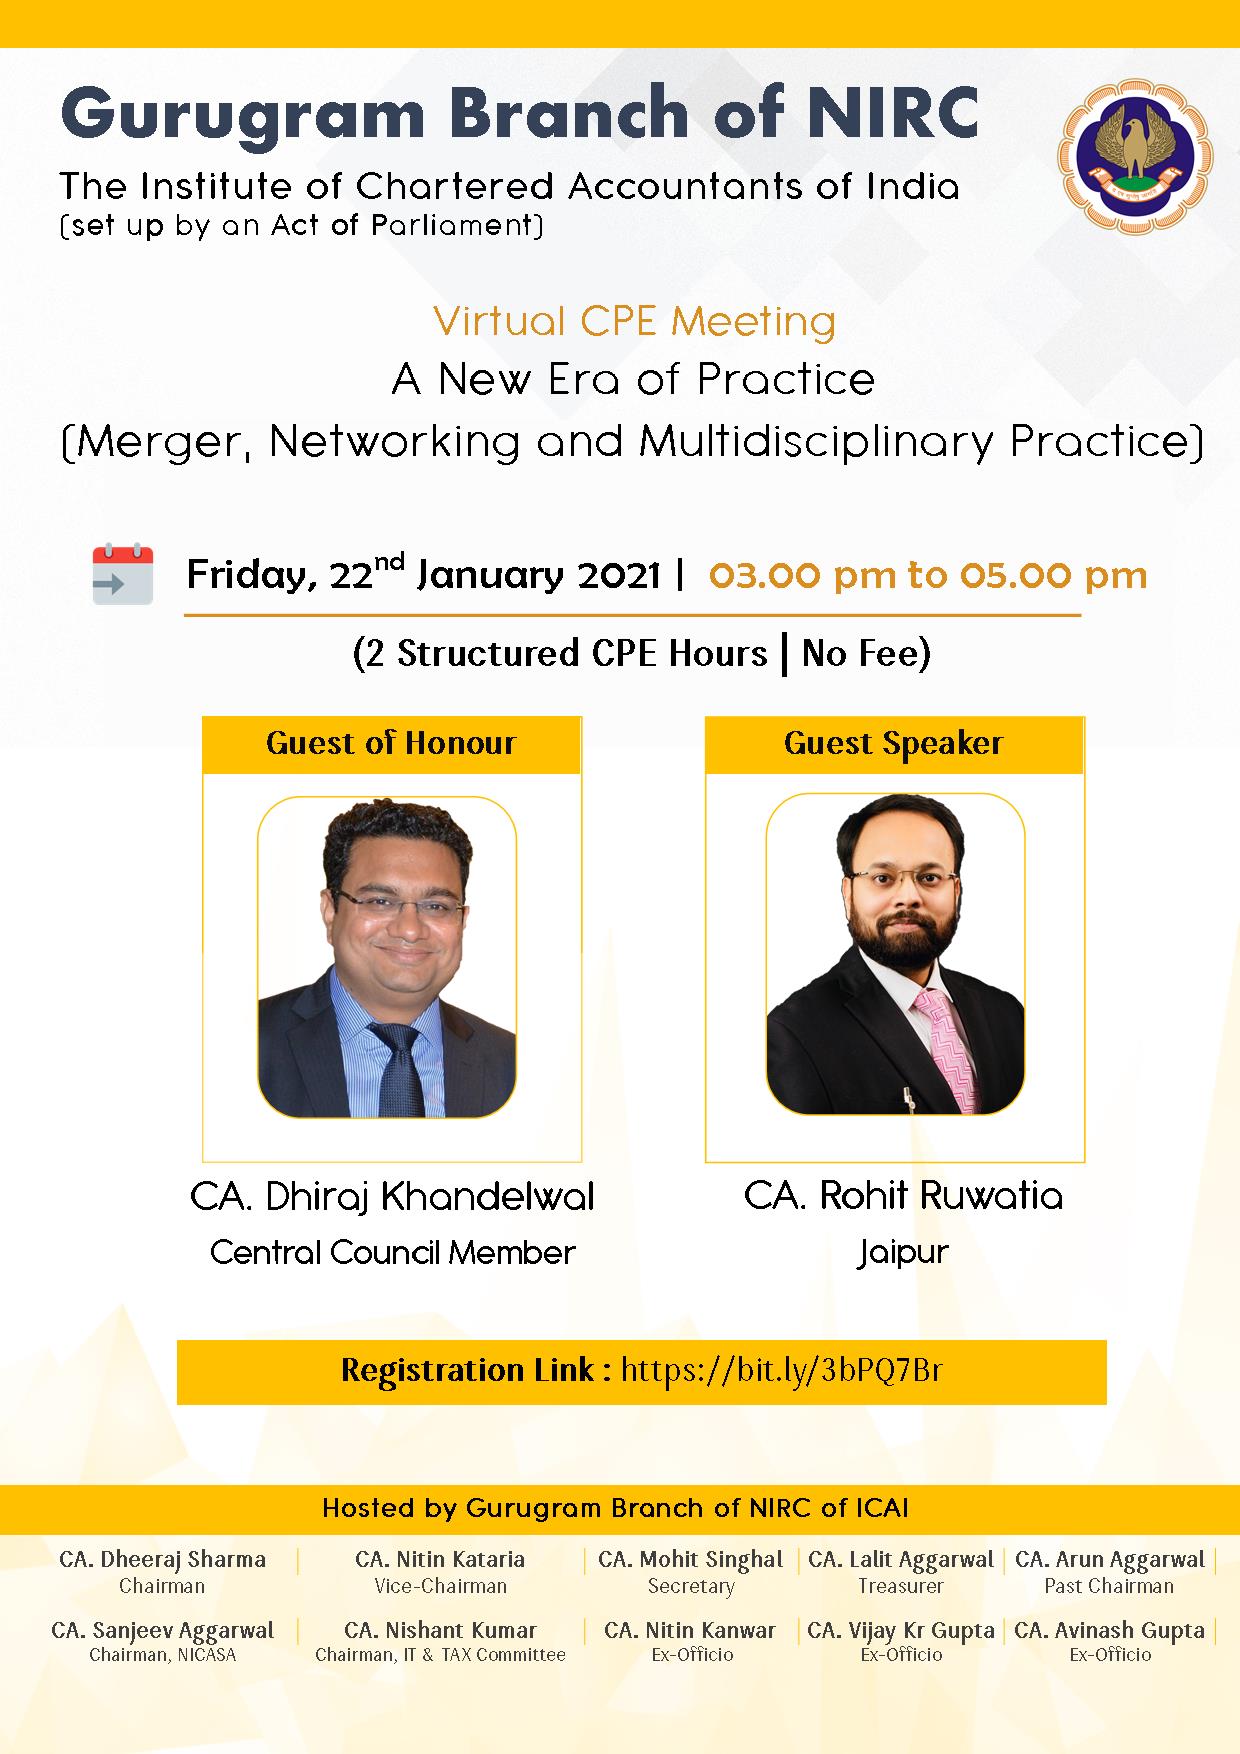 Virtual CPE Meeting on A New Era of Practice (Merger, Networking and Multidisciplinary Practice)